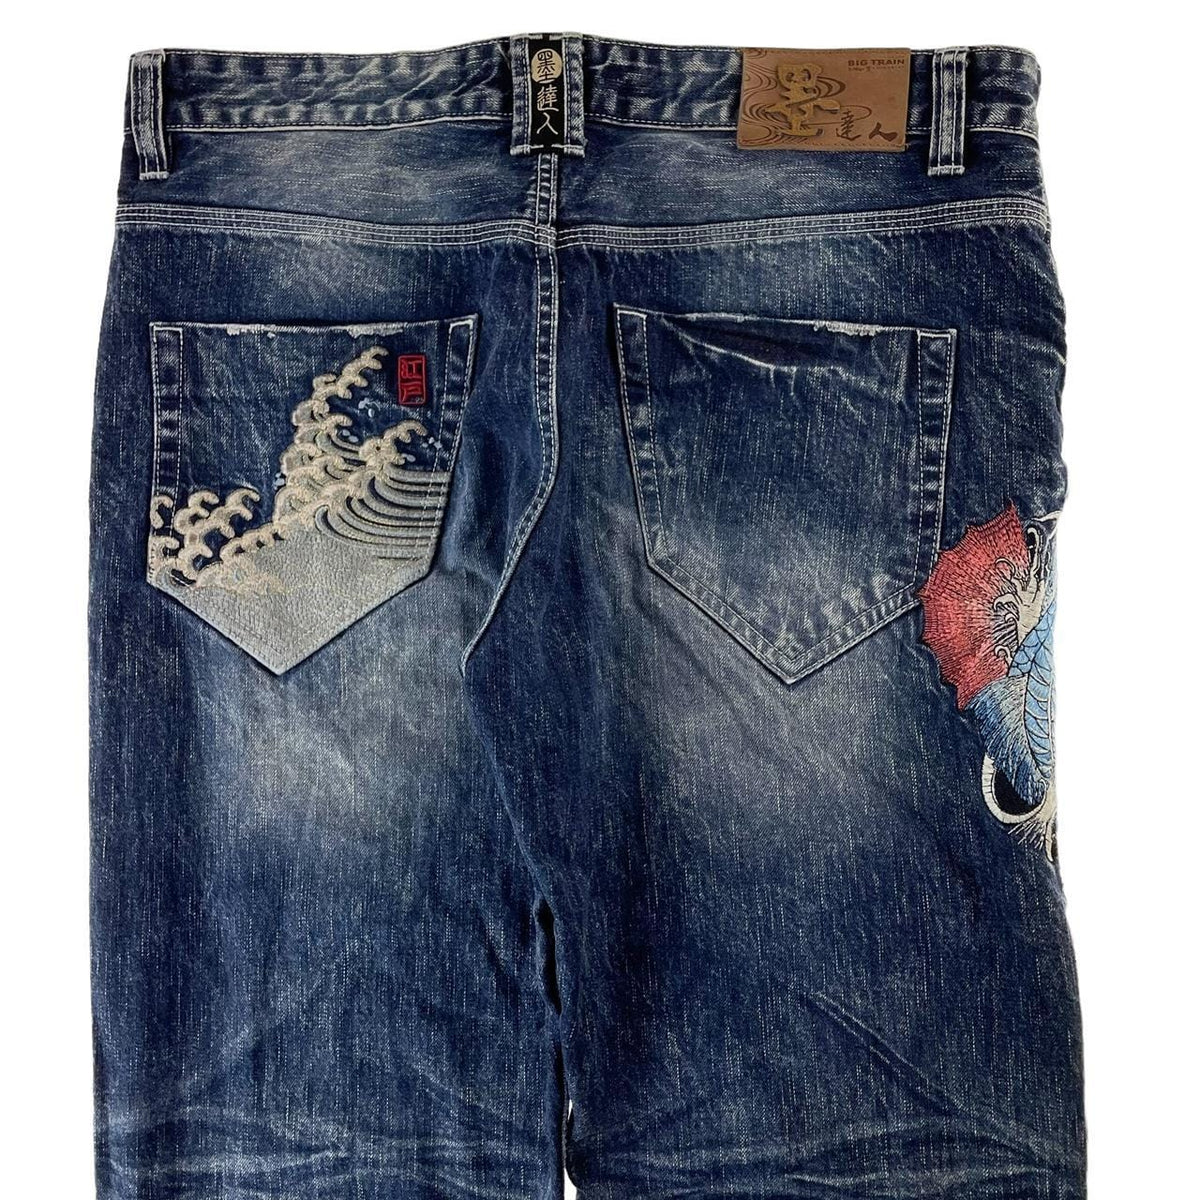 Vintage Koi fish and Waves big train Japanese denim jeans trousers W38